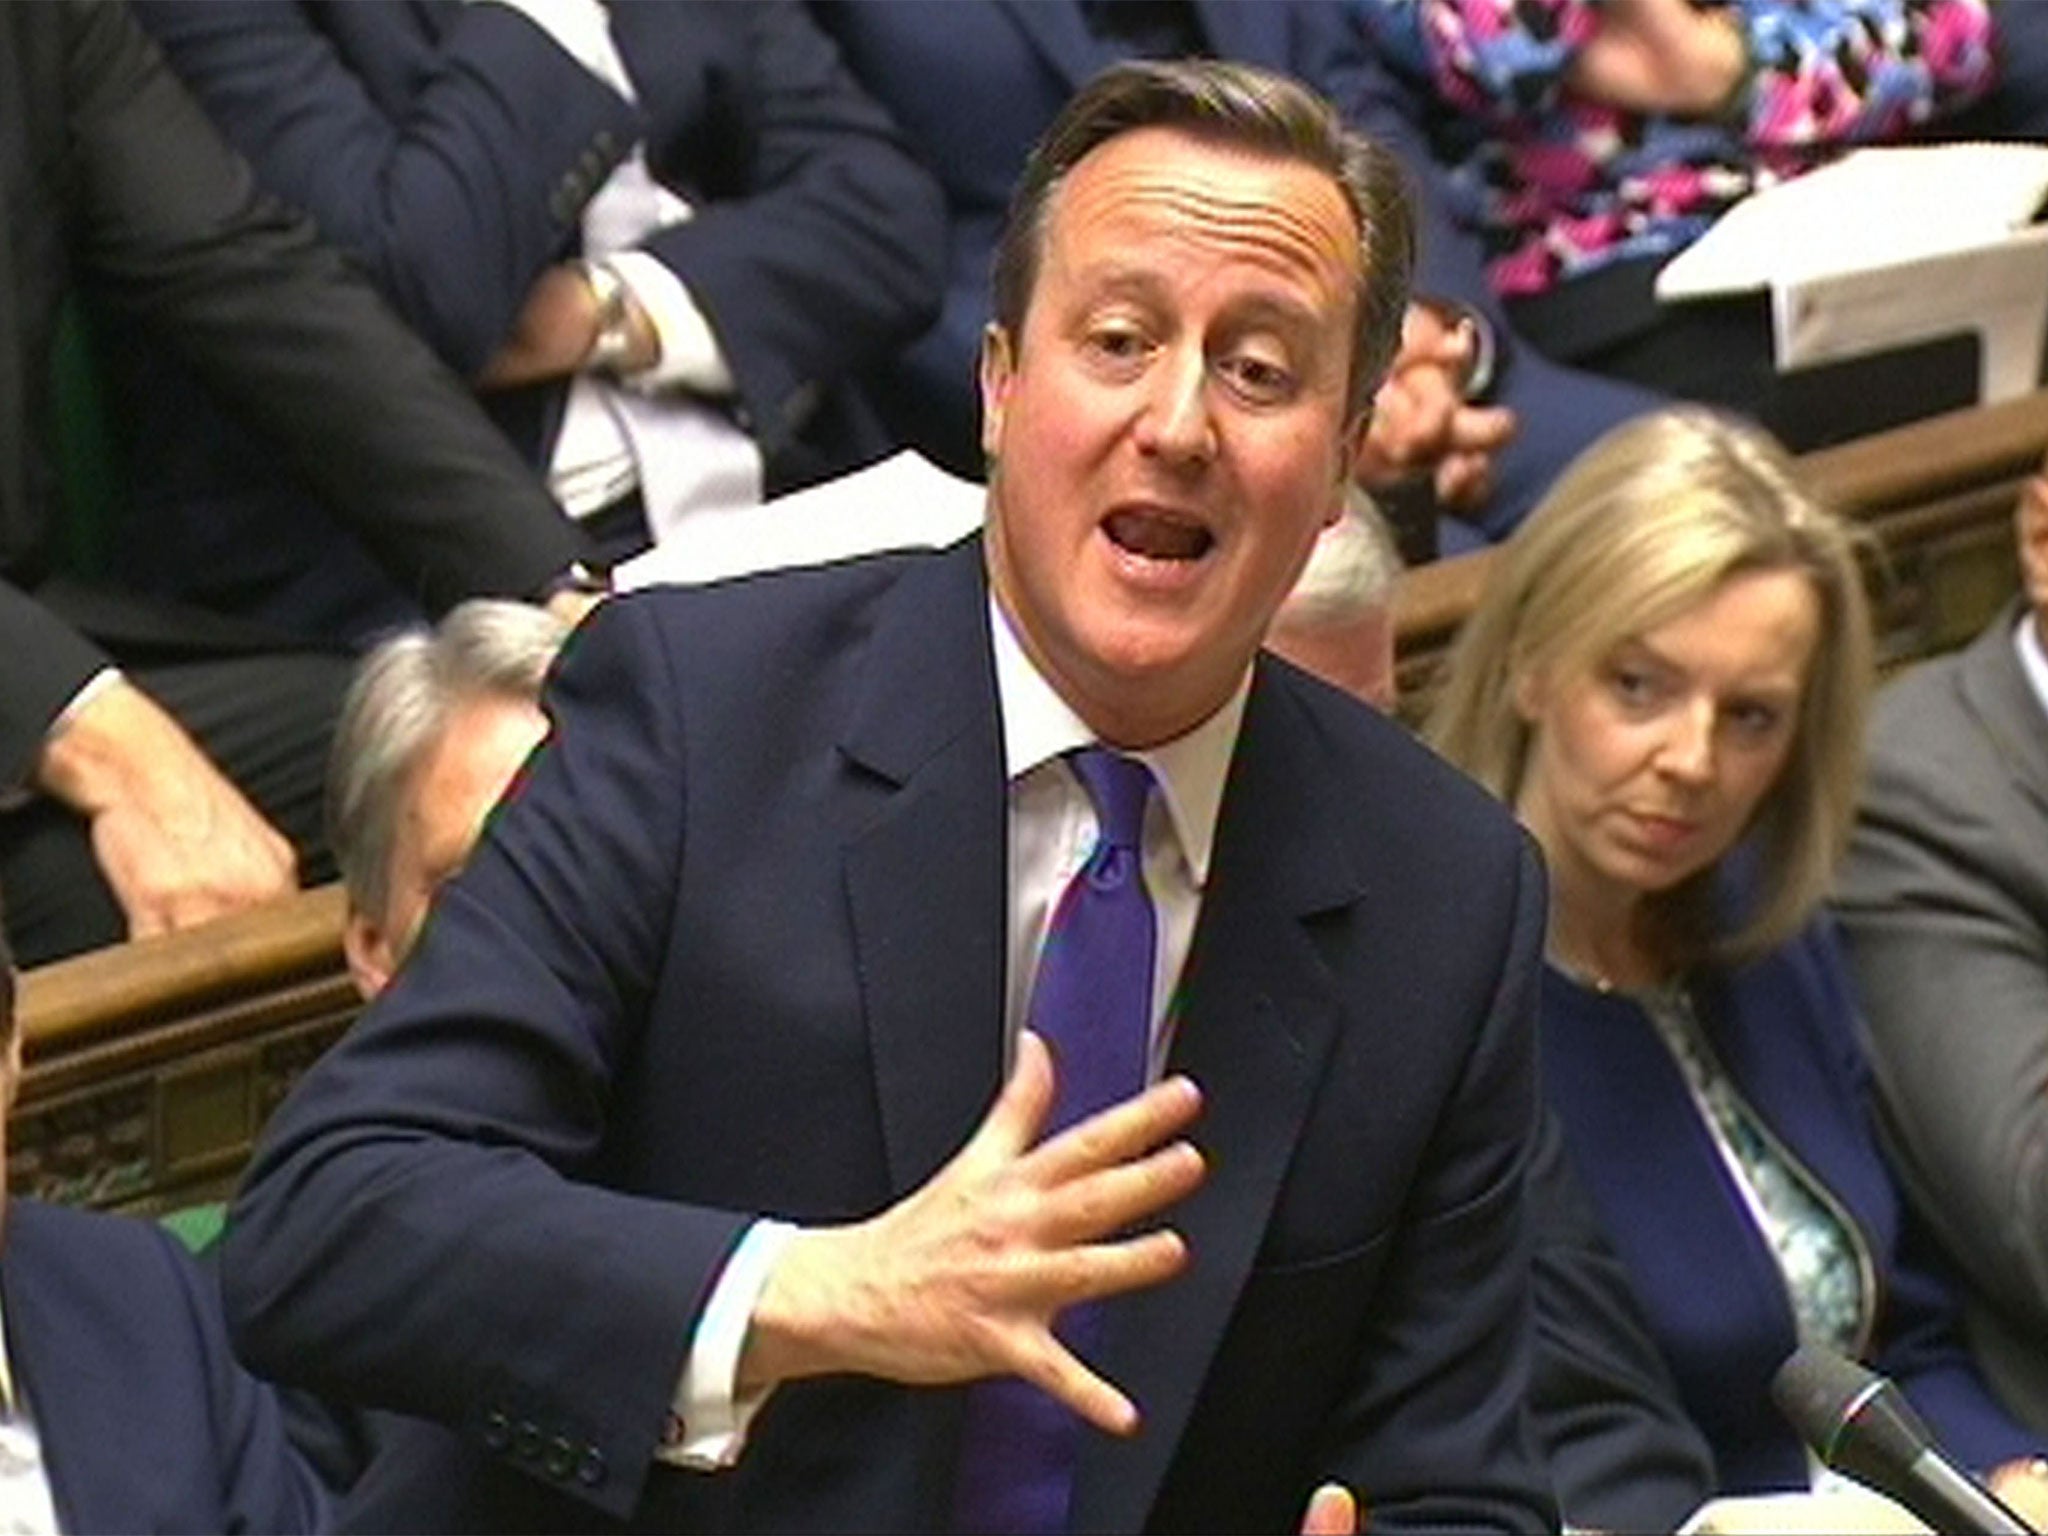 &#13;
David Cameron is under pressure from Labour to scrap the cuts to tax credits&#13;